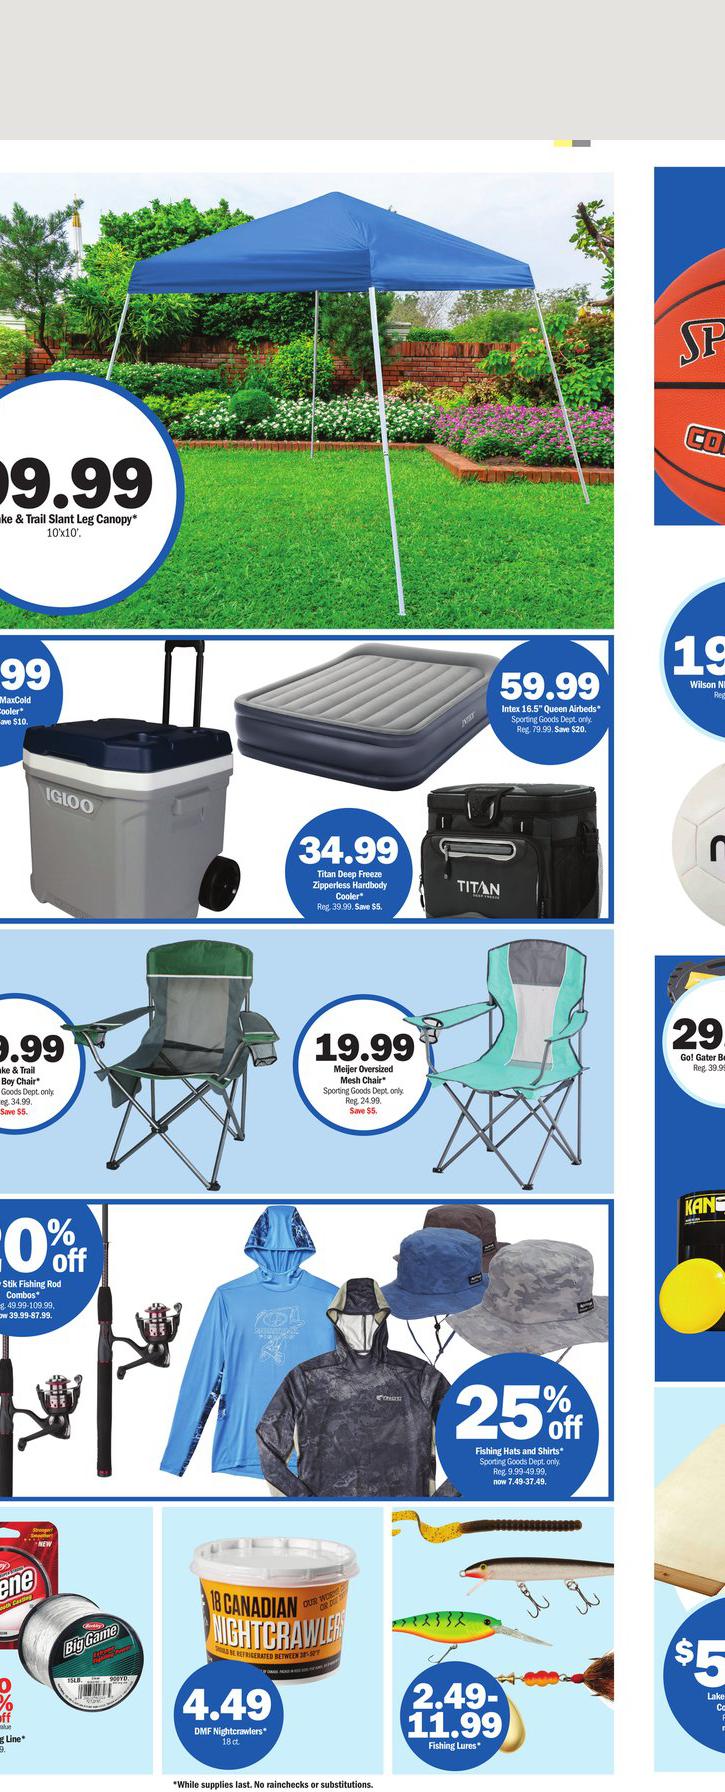 07.08.2022 Meijer ad 27. page